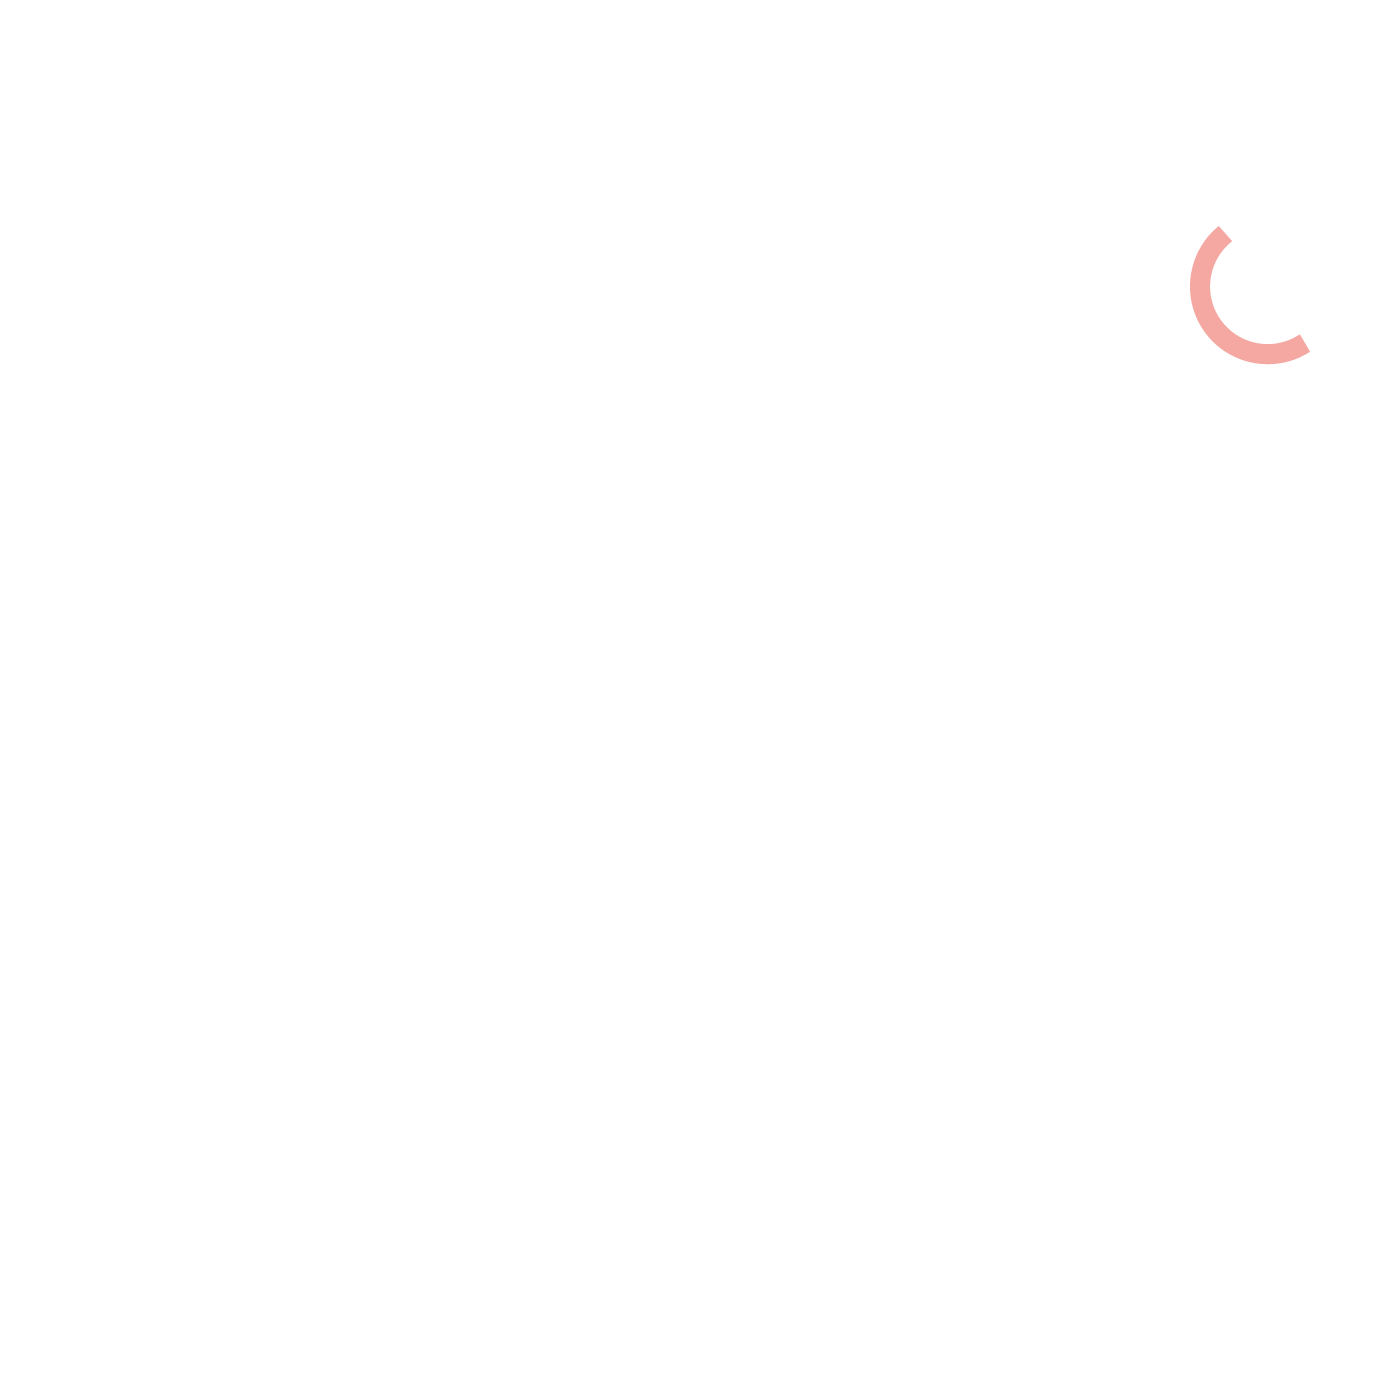 naturally selected TCRs